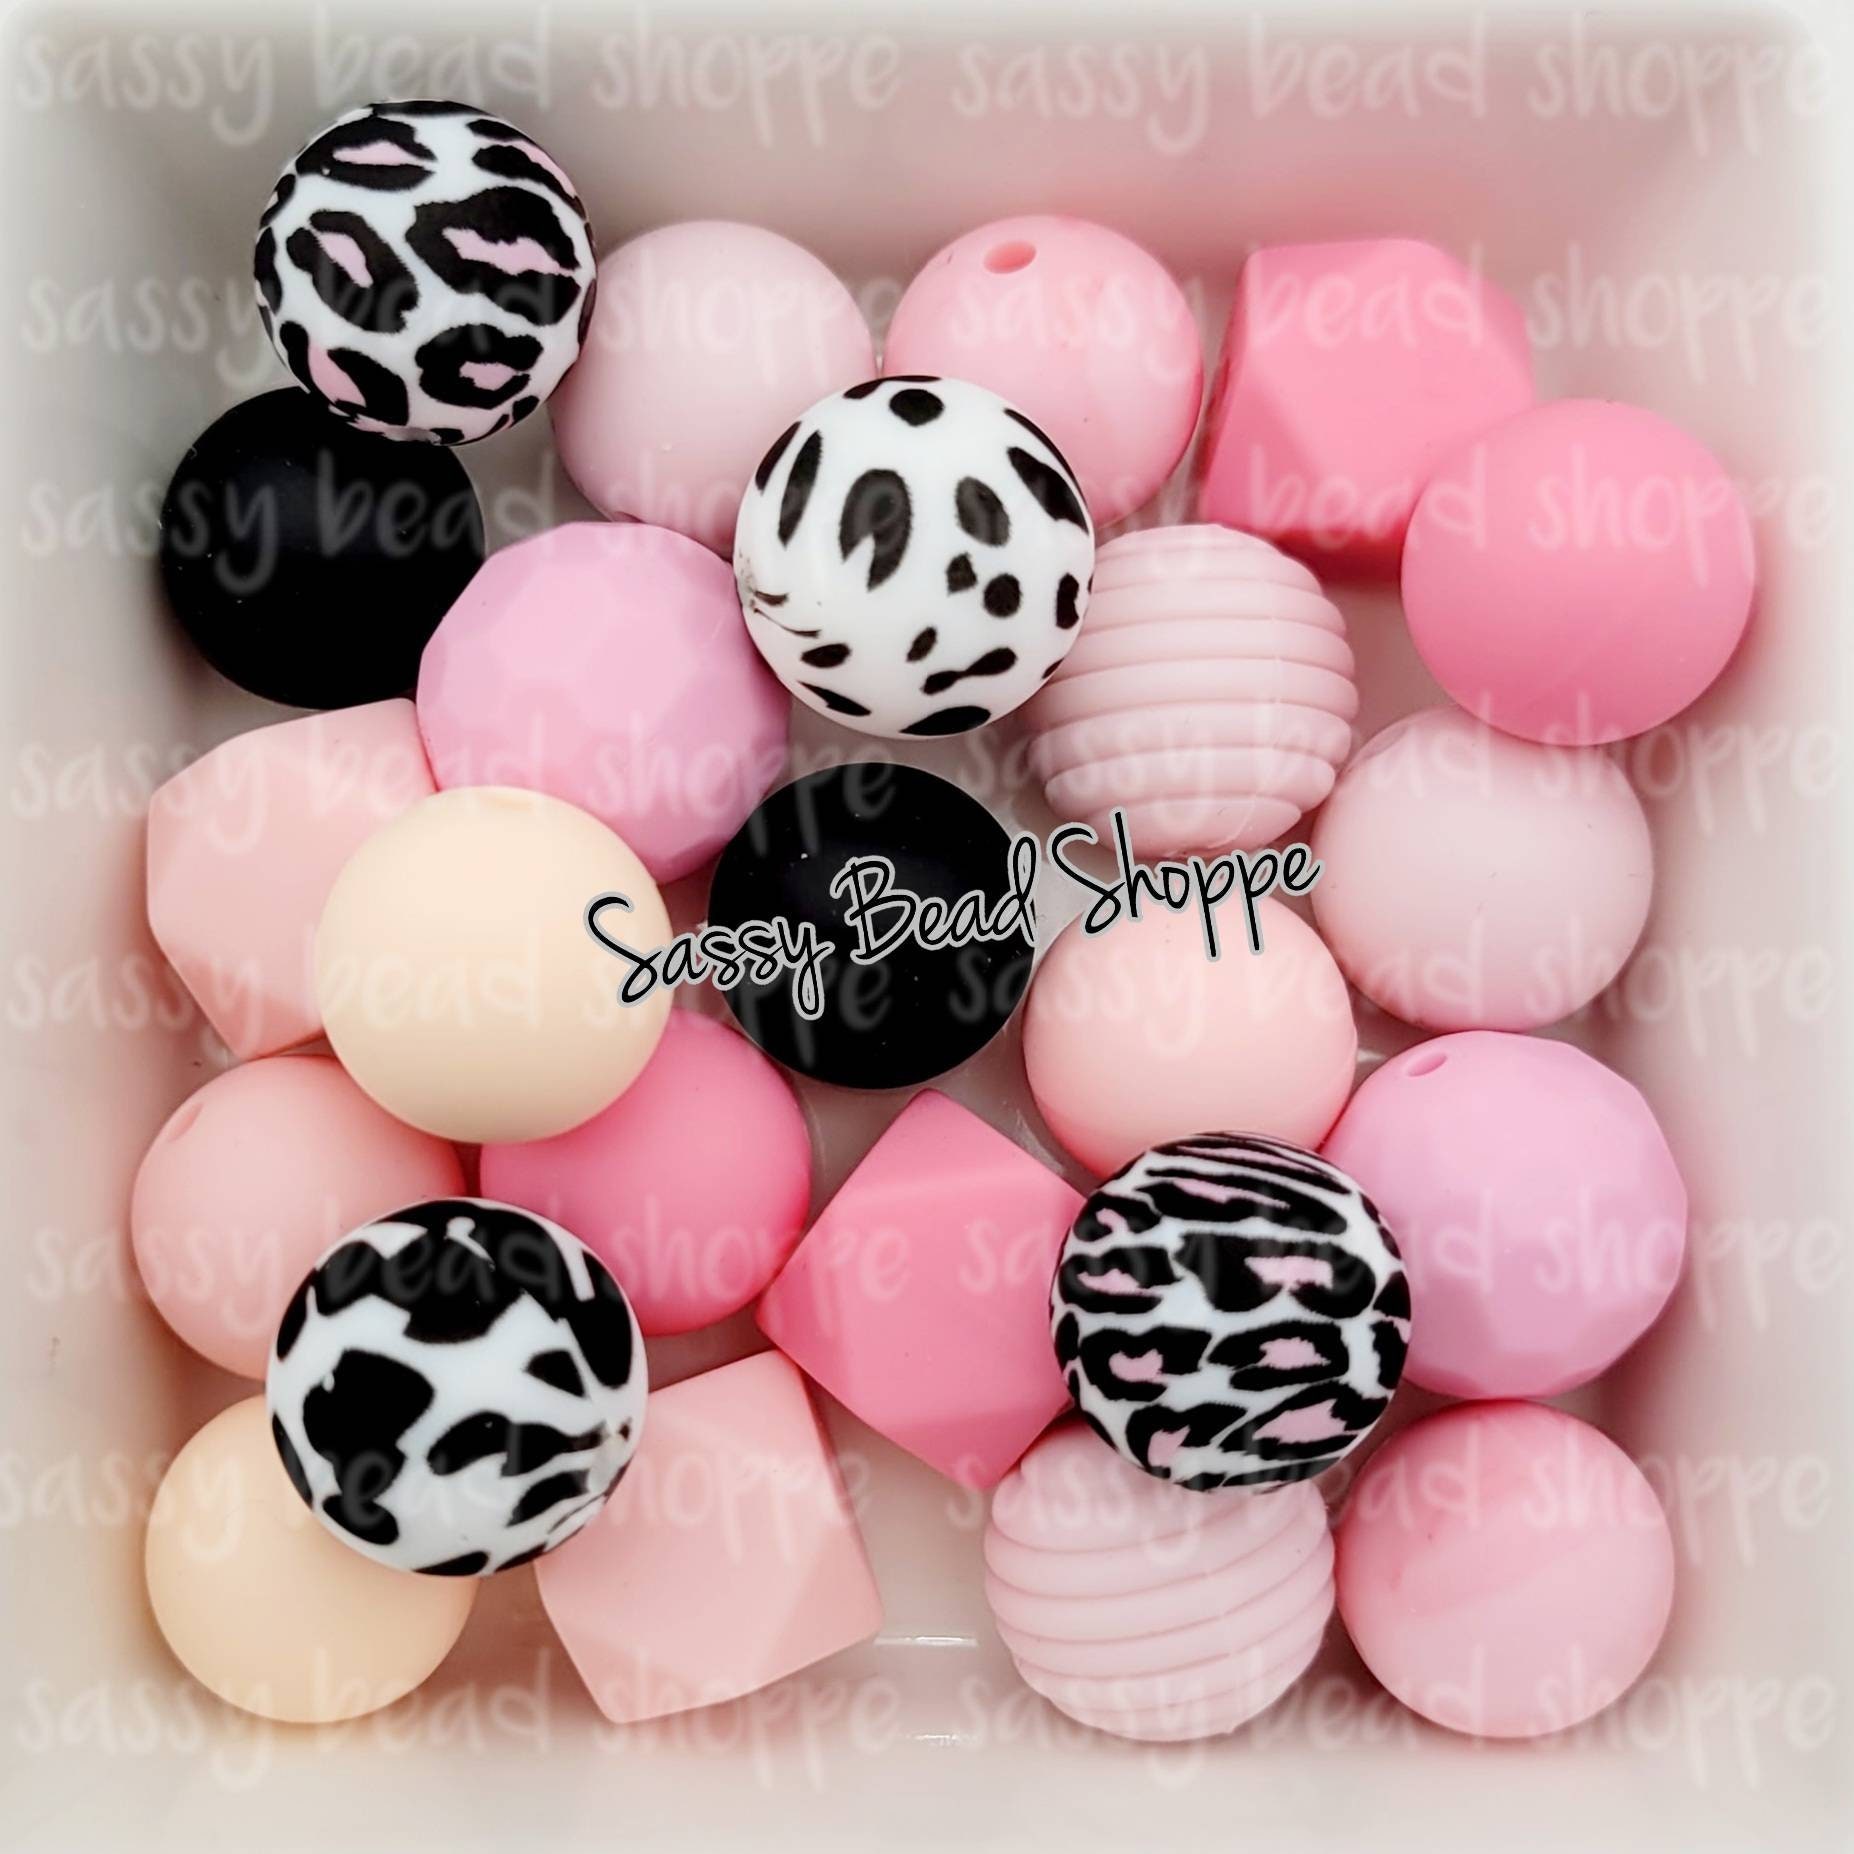 Harley Ride Silicone Bead Mix, Set of 24, Bulk Mix of Silicone Beads,  Silicone Beads, Beaded Pens, Keychain, Beads for Pens, Pen Beads 